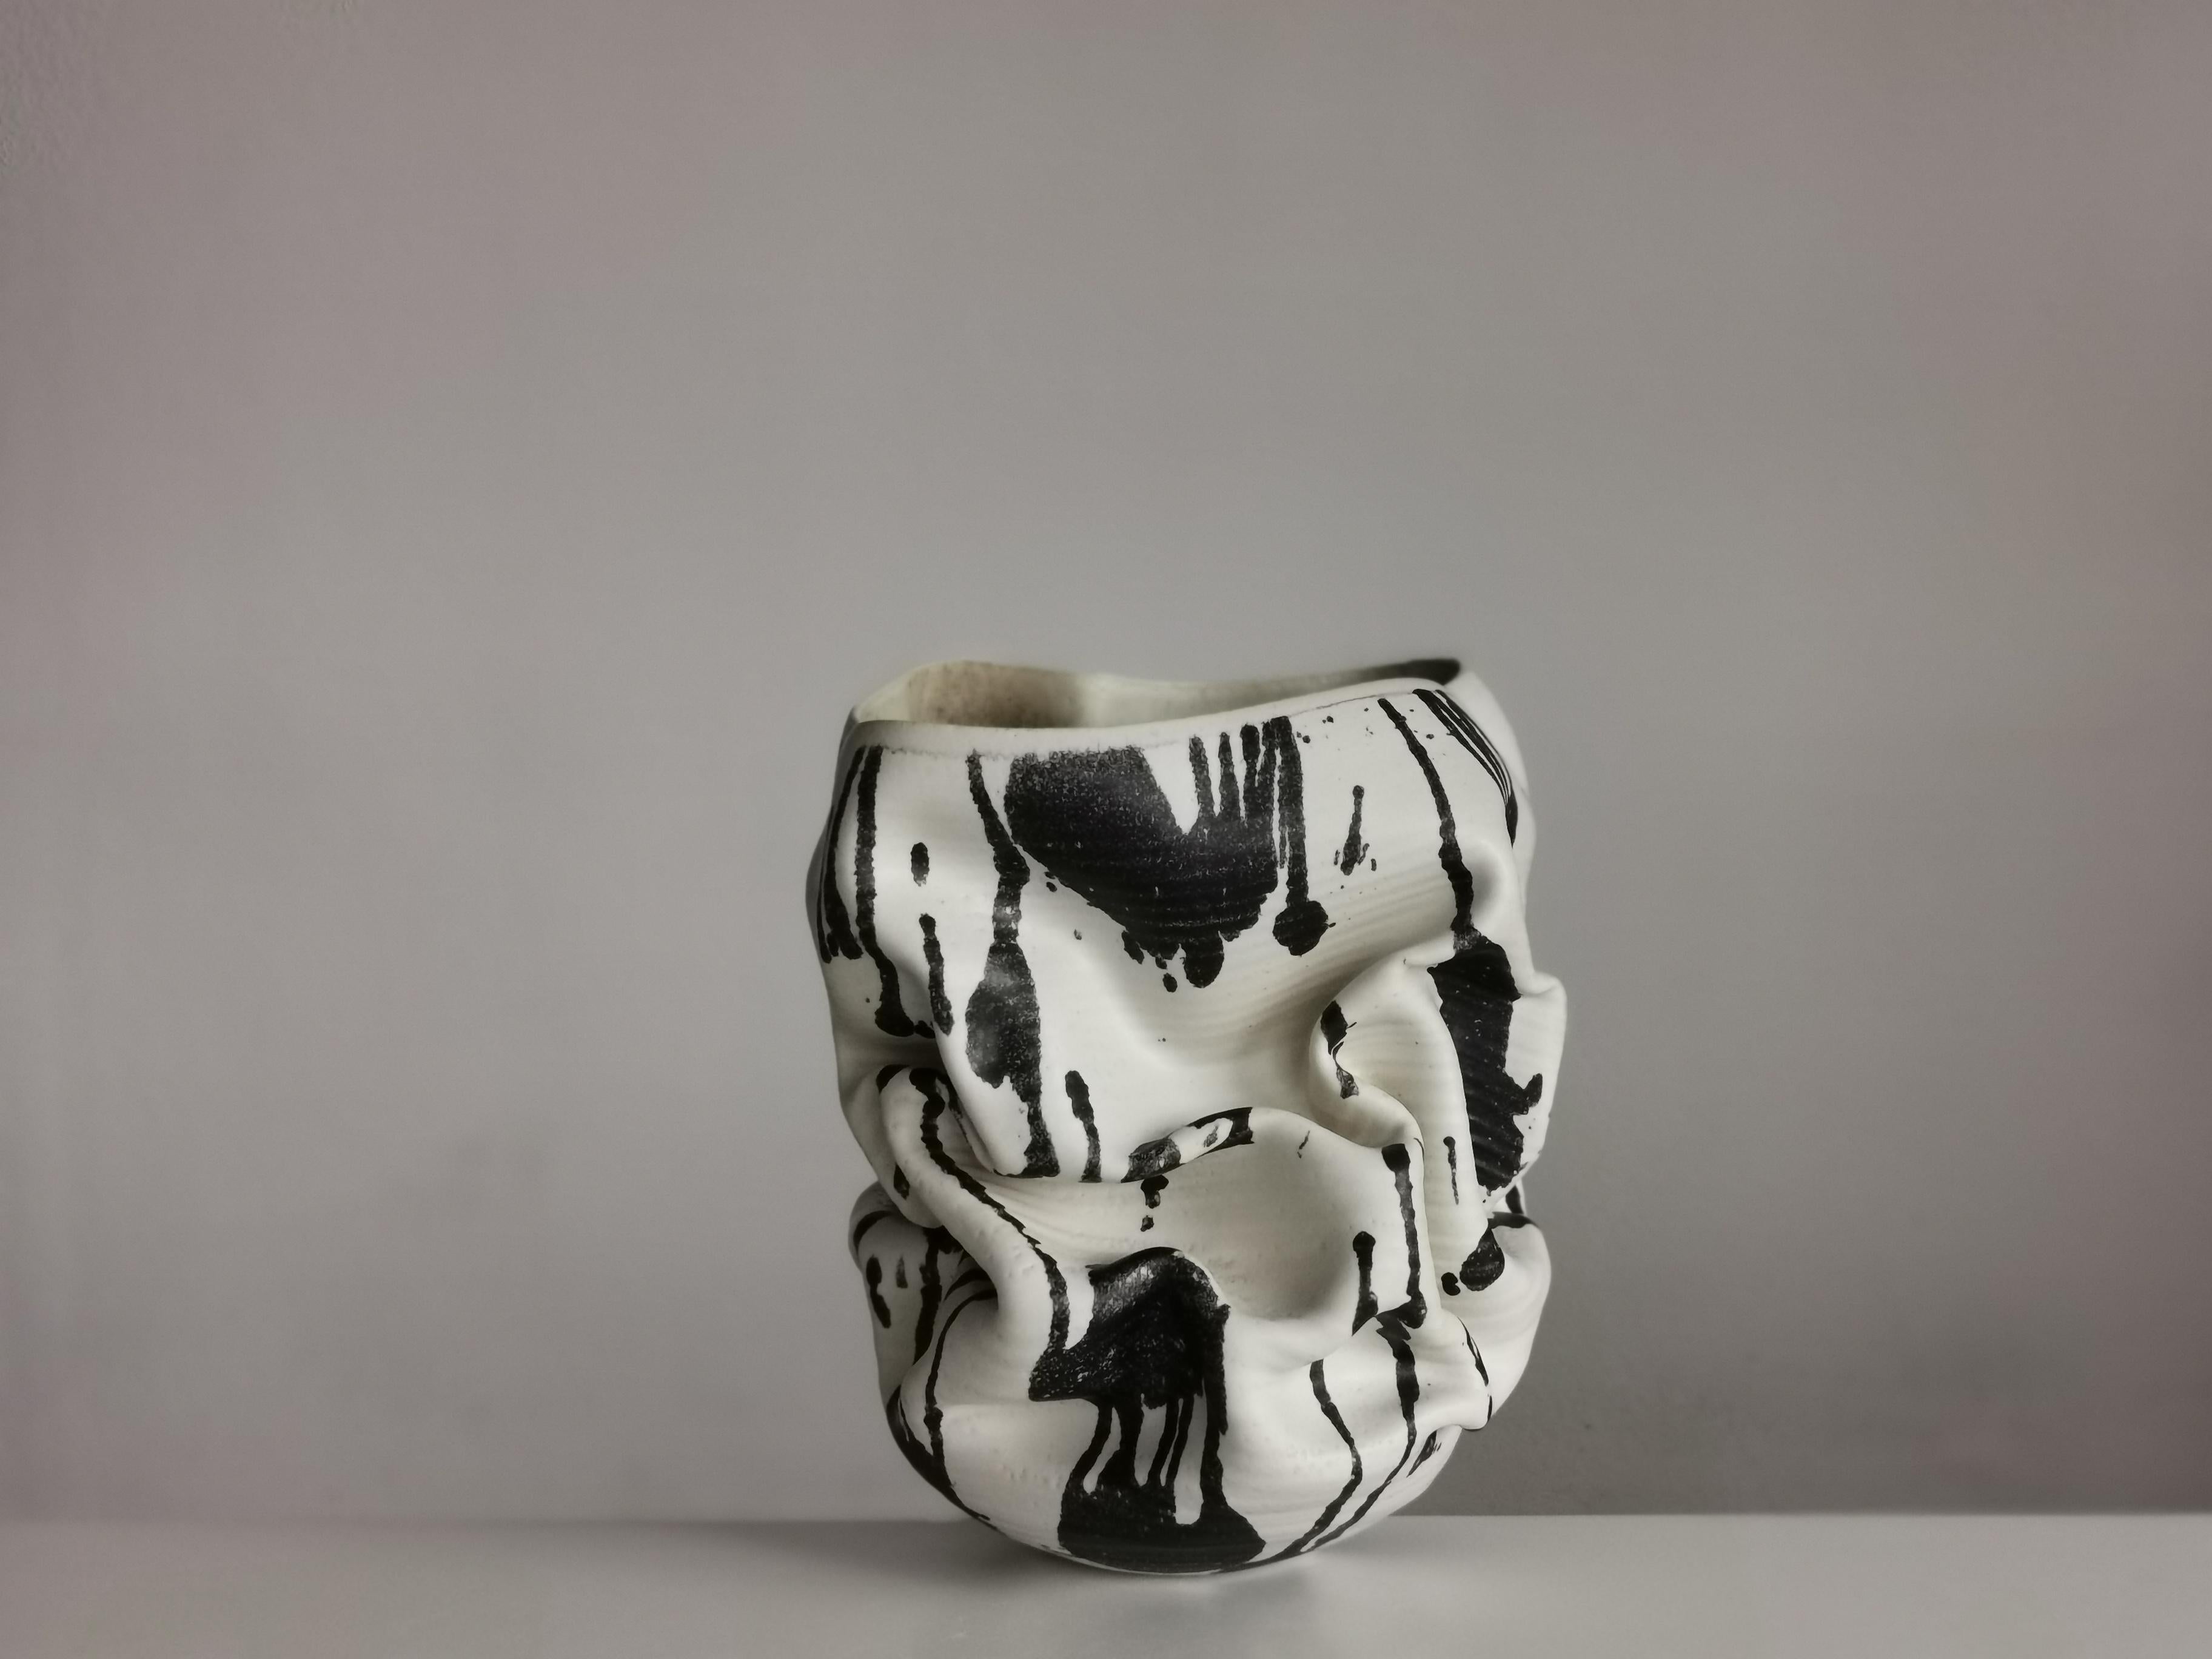 Sumptuous ceramic vessel from ceramic artist Nicholas Arroyave-Portela. Made in 2021.

Materials: White St.Thomas clay, Stoneware glazes, multi fired to cone 9 (1260 degrees)
Dimensions: 31 cm tall, 27 cm wide, 27 cm deep
Weight: 3.5 Kg

The artist